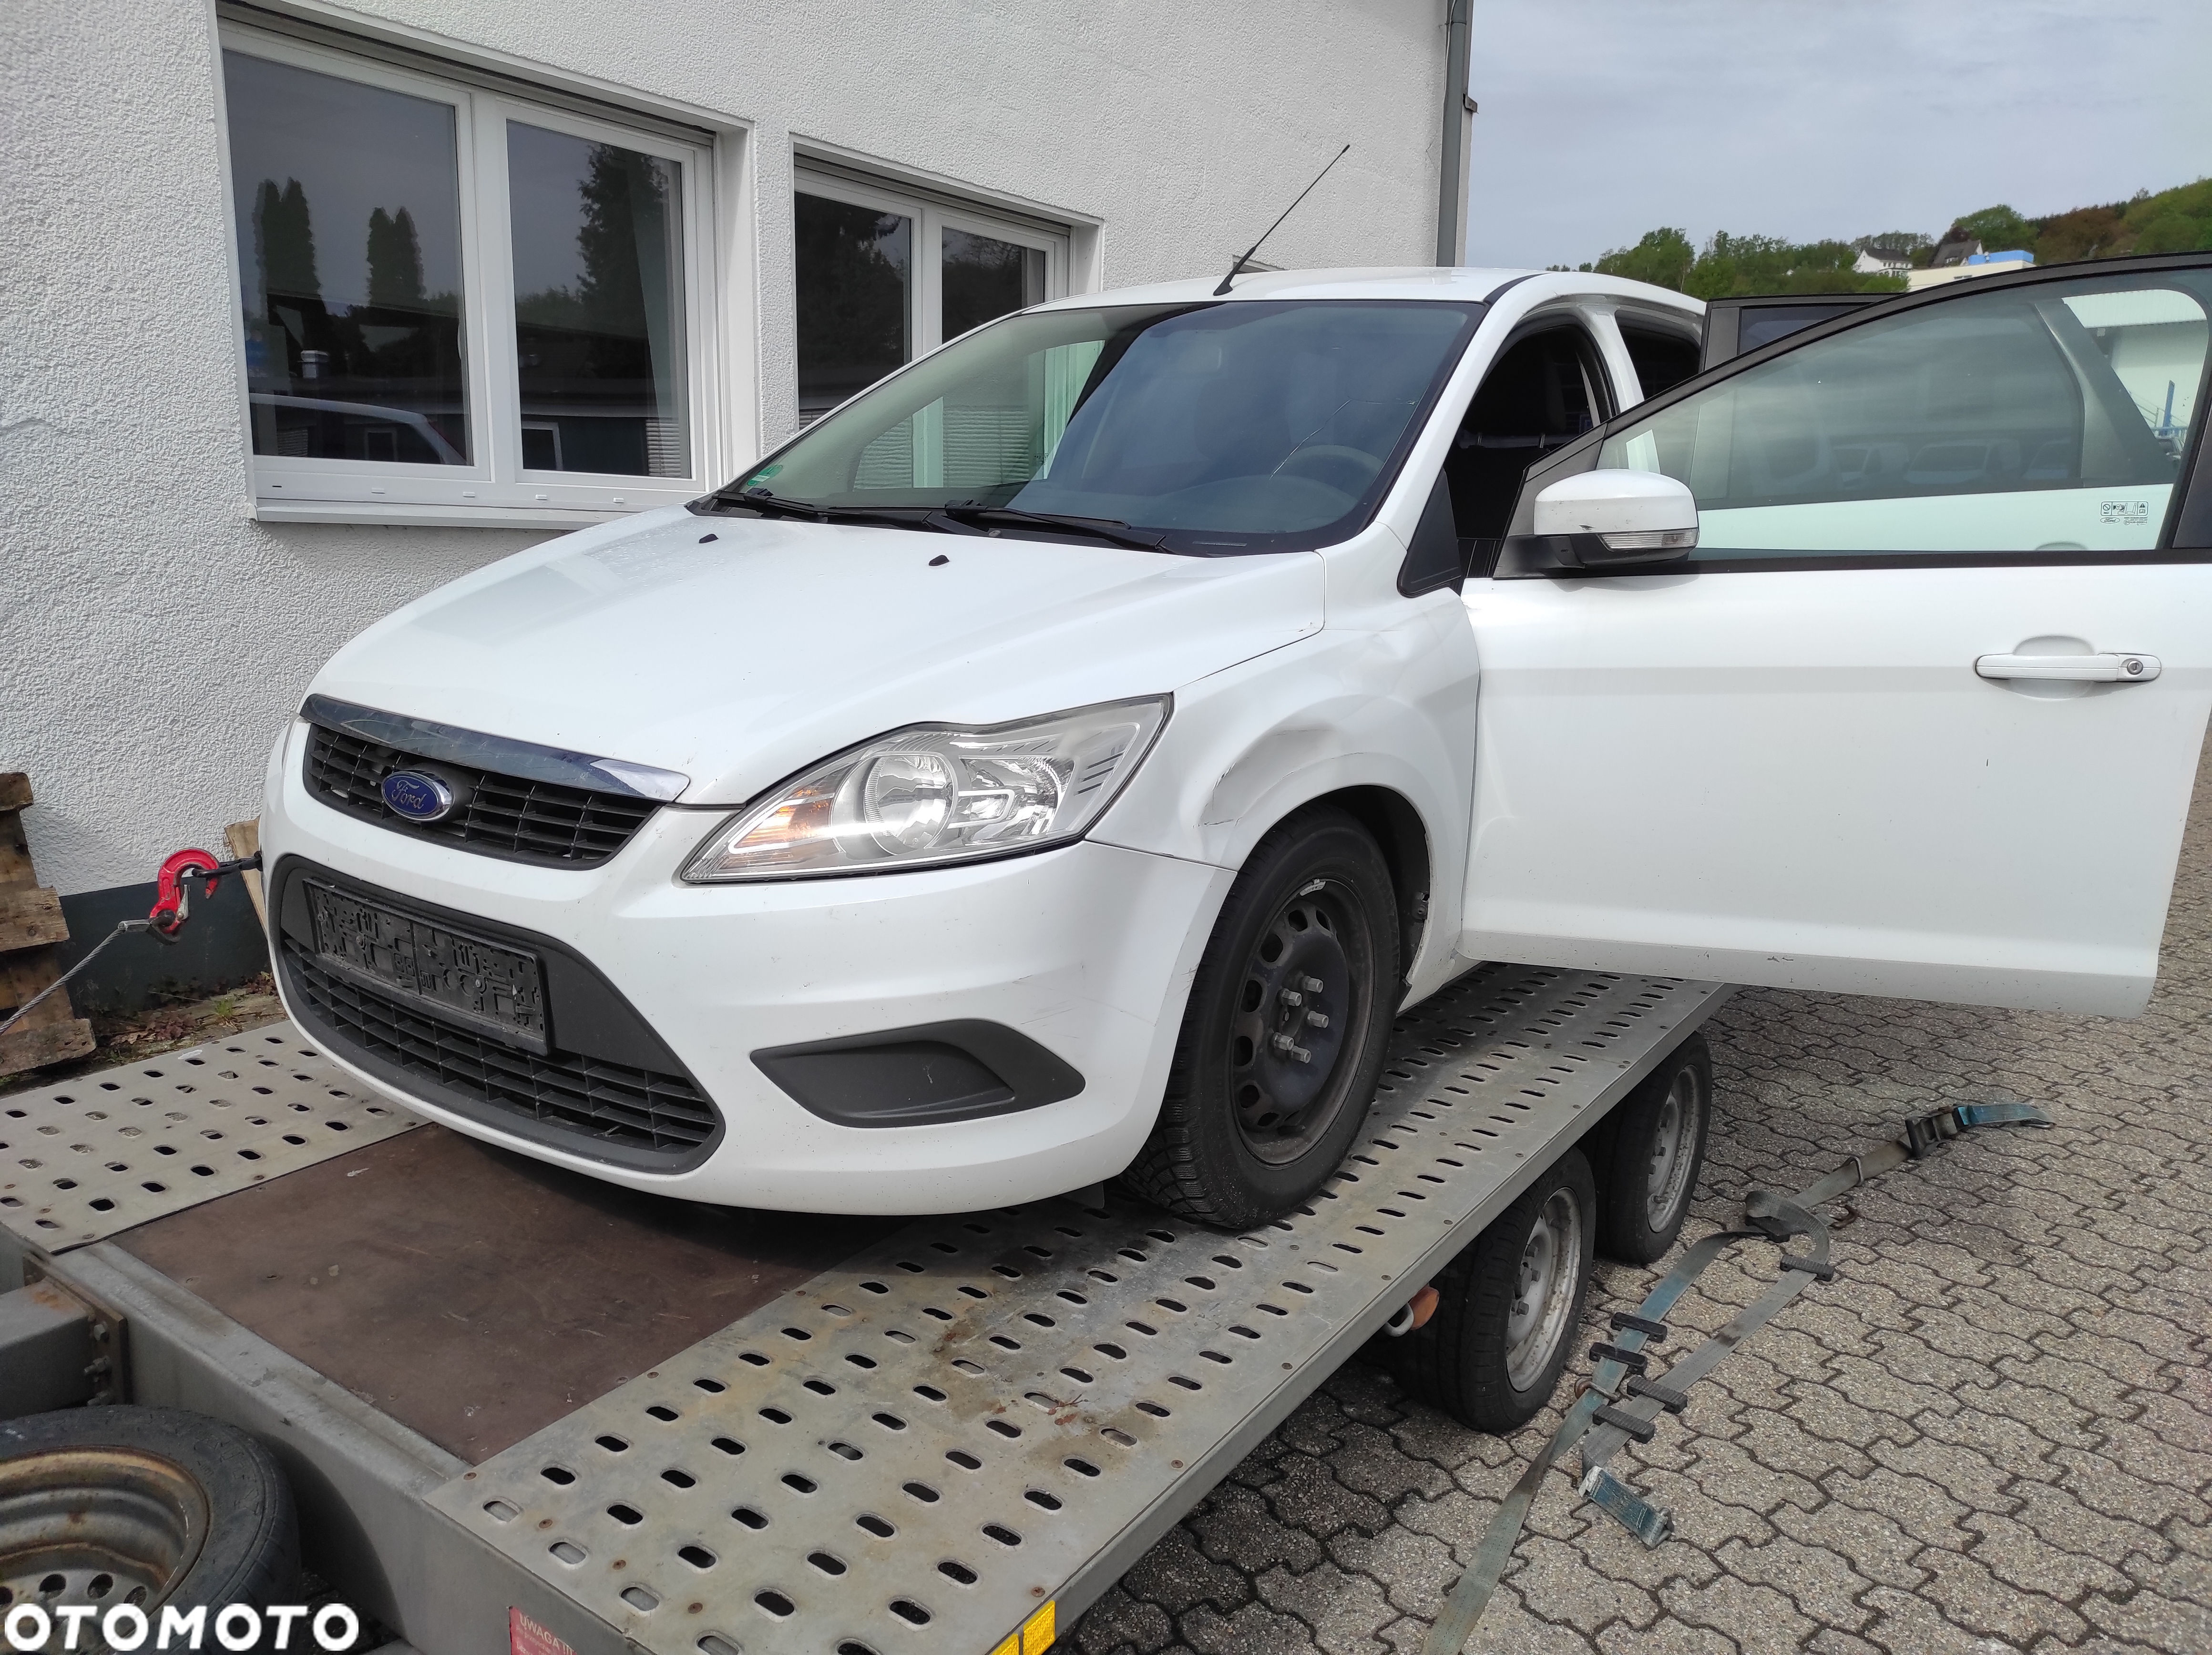 Ford Focus 1.6 TDCi DPF Ambiente - 15